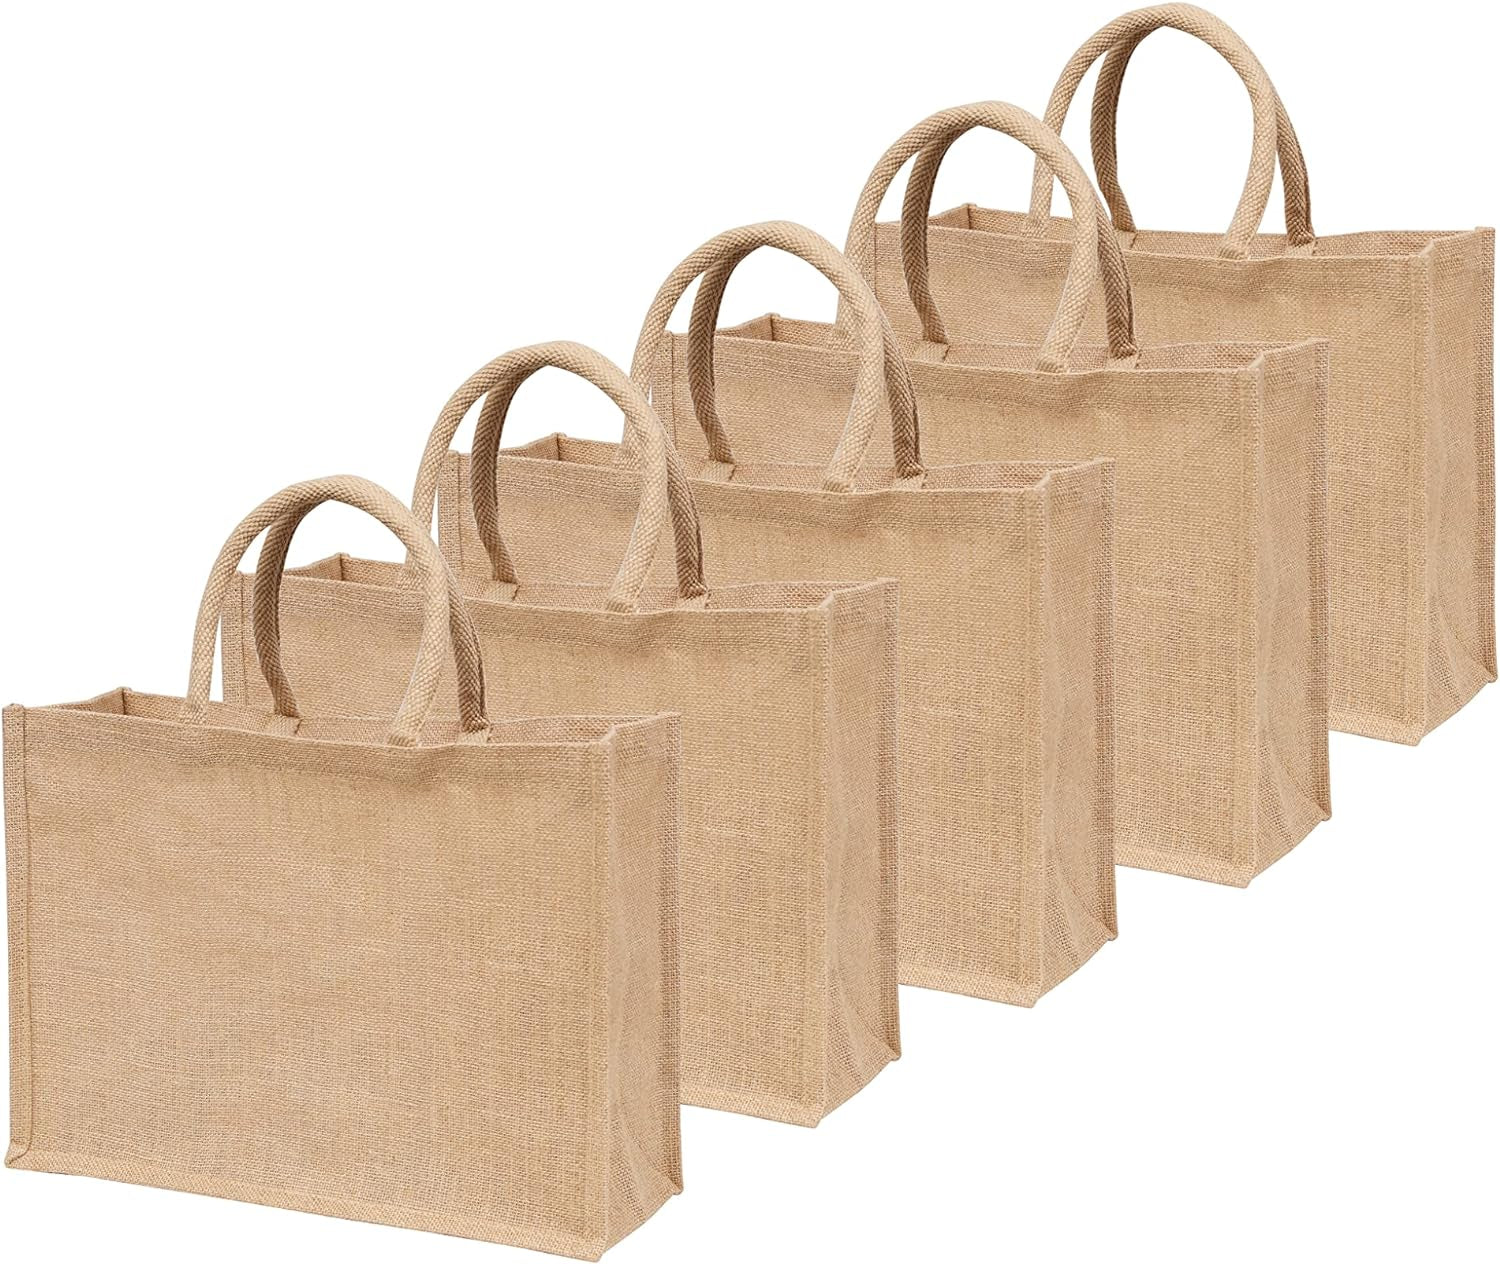 Jute Burlap Tote Bags with Handle | Natural Eco-Friendly Reusable Grocery Bag | Totes for Bridesmaids | by Yogi'S Gift® (Pack of 5)